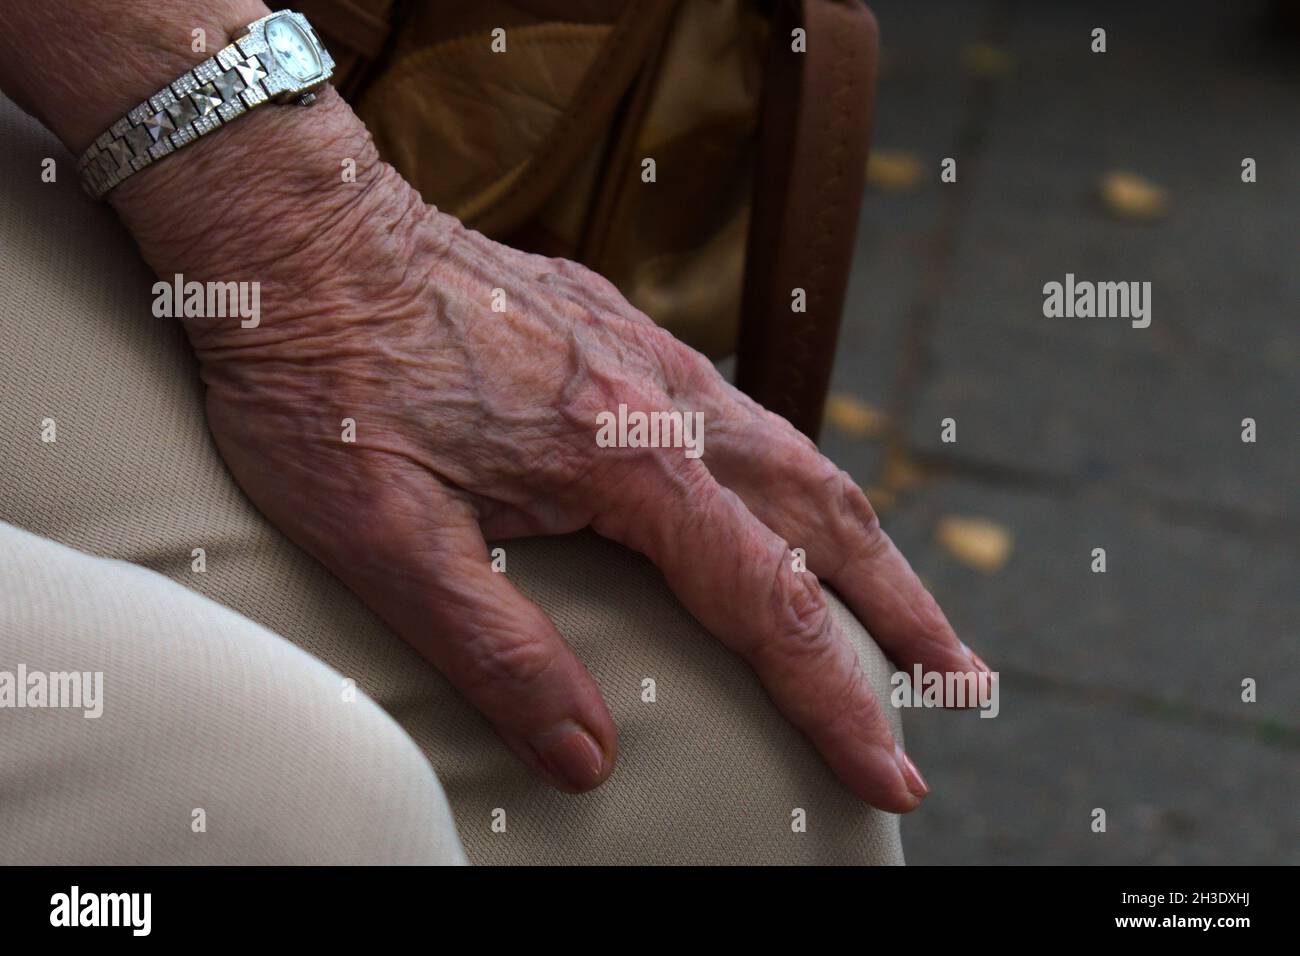 elderly woman hand with a watch on her knee Stock Photo